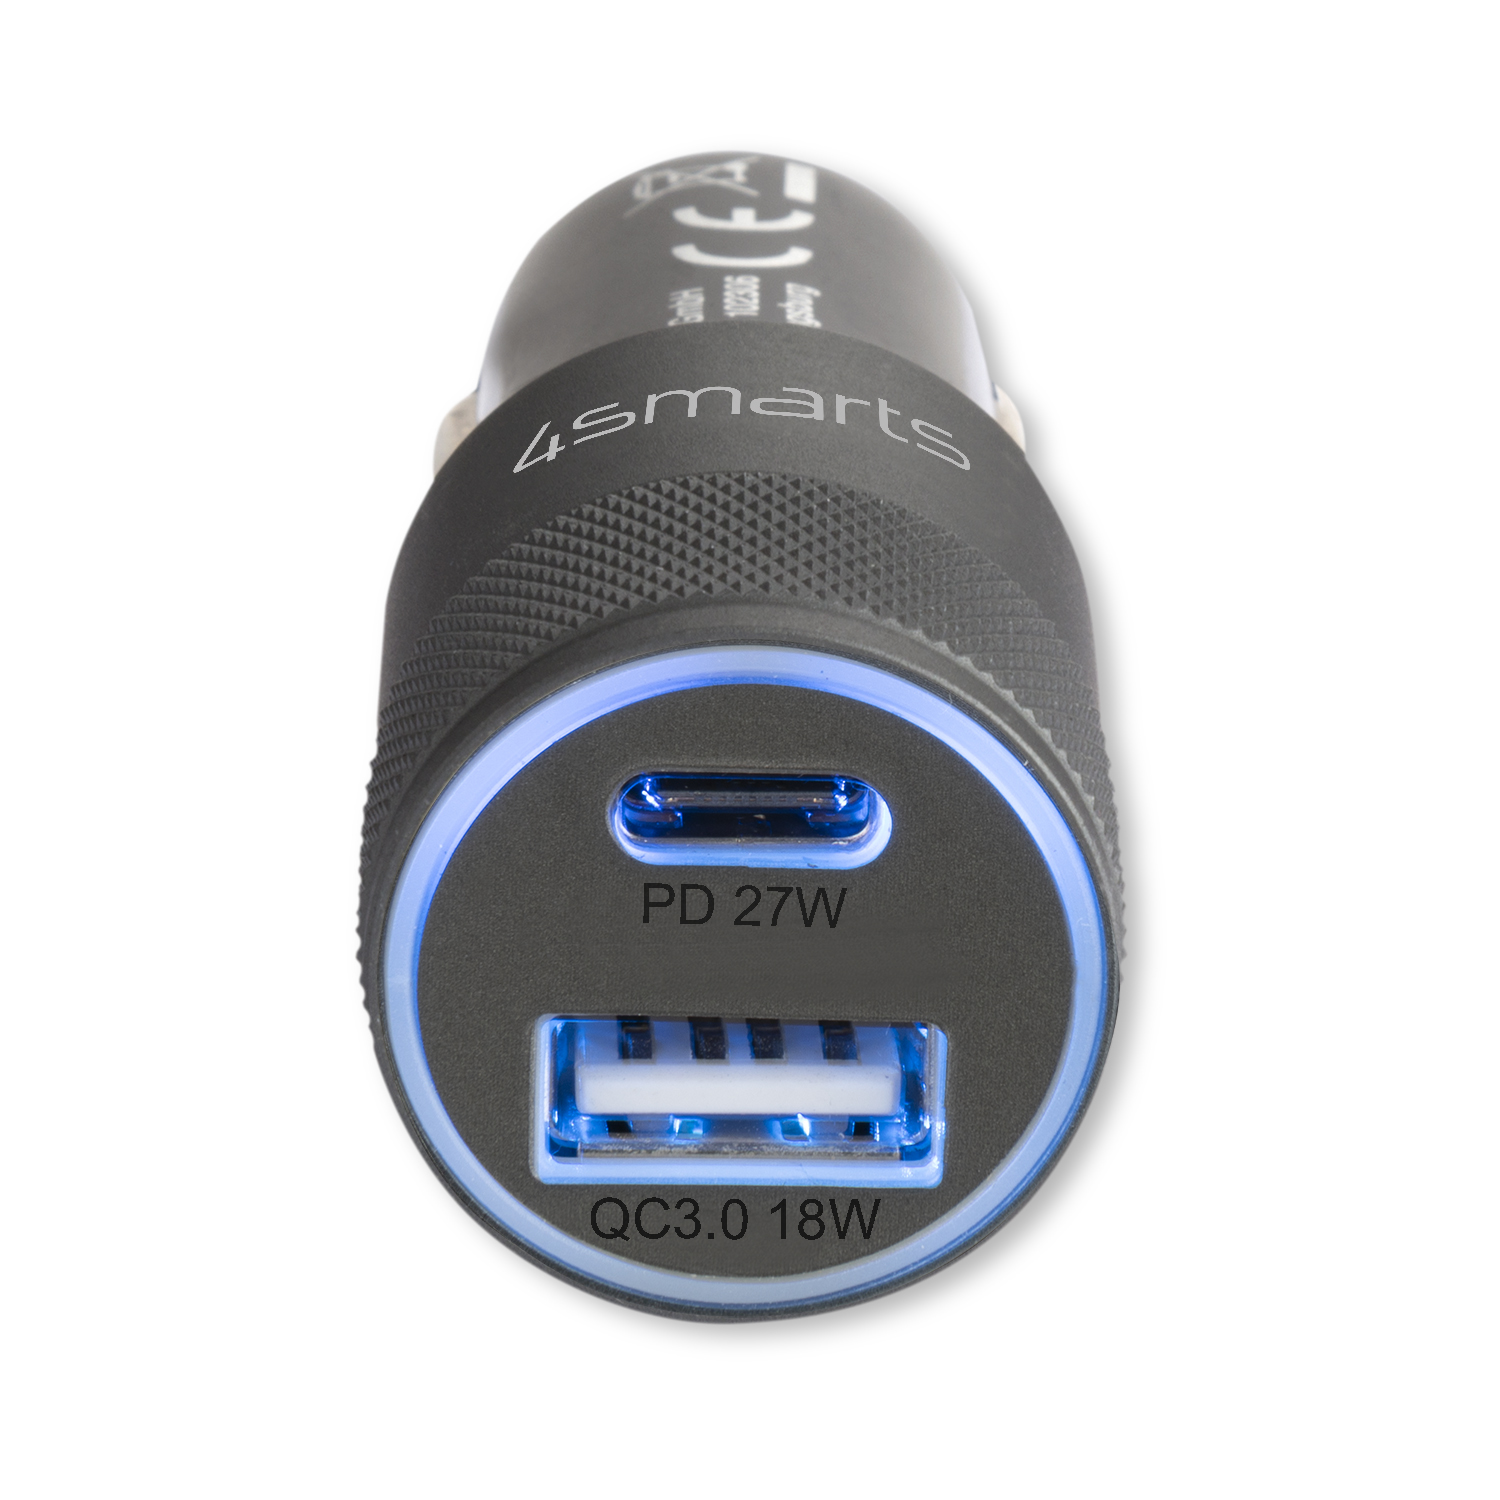 Rapid+ Adapter 27W Charge Quick 4SMARTS mit PD